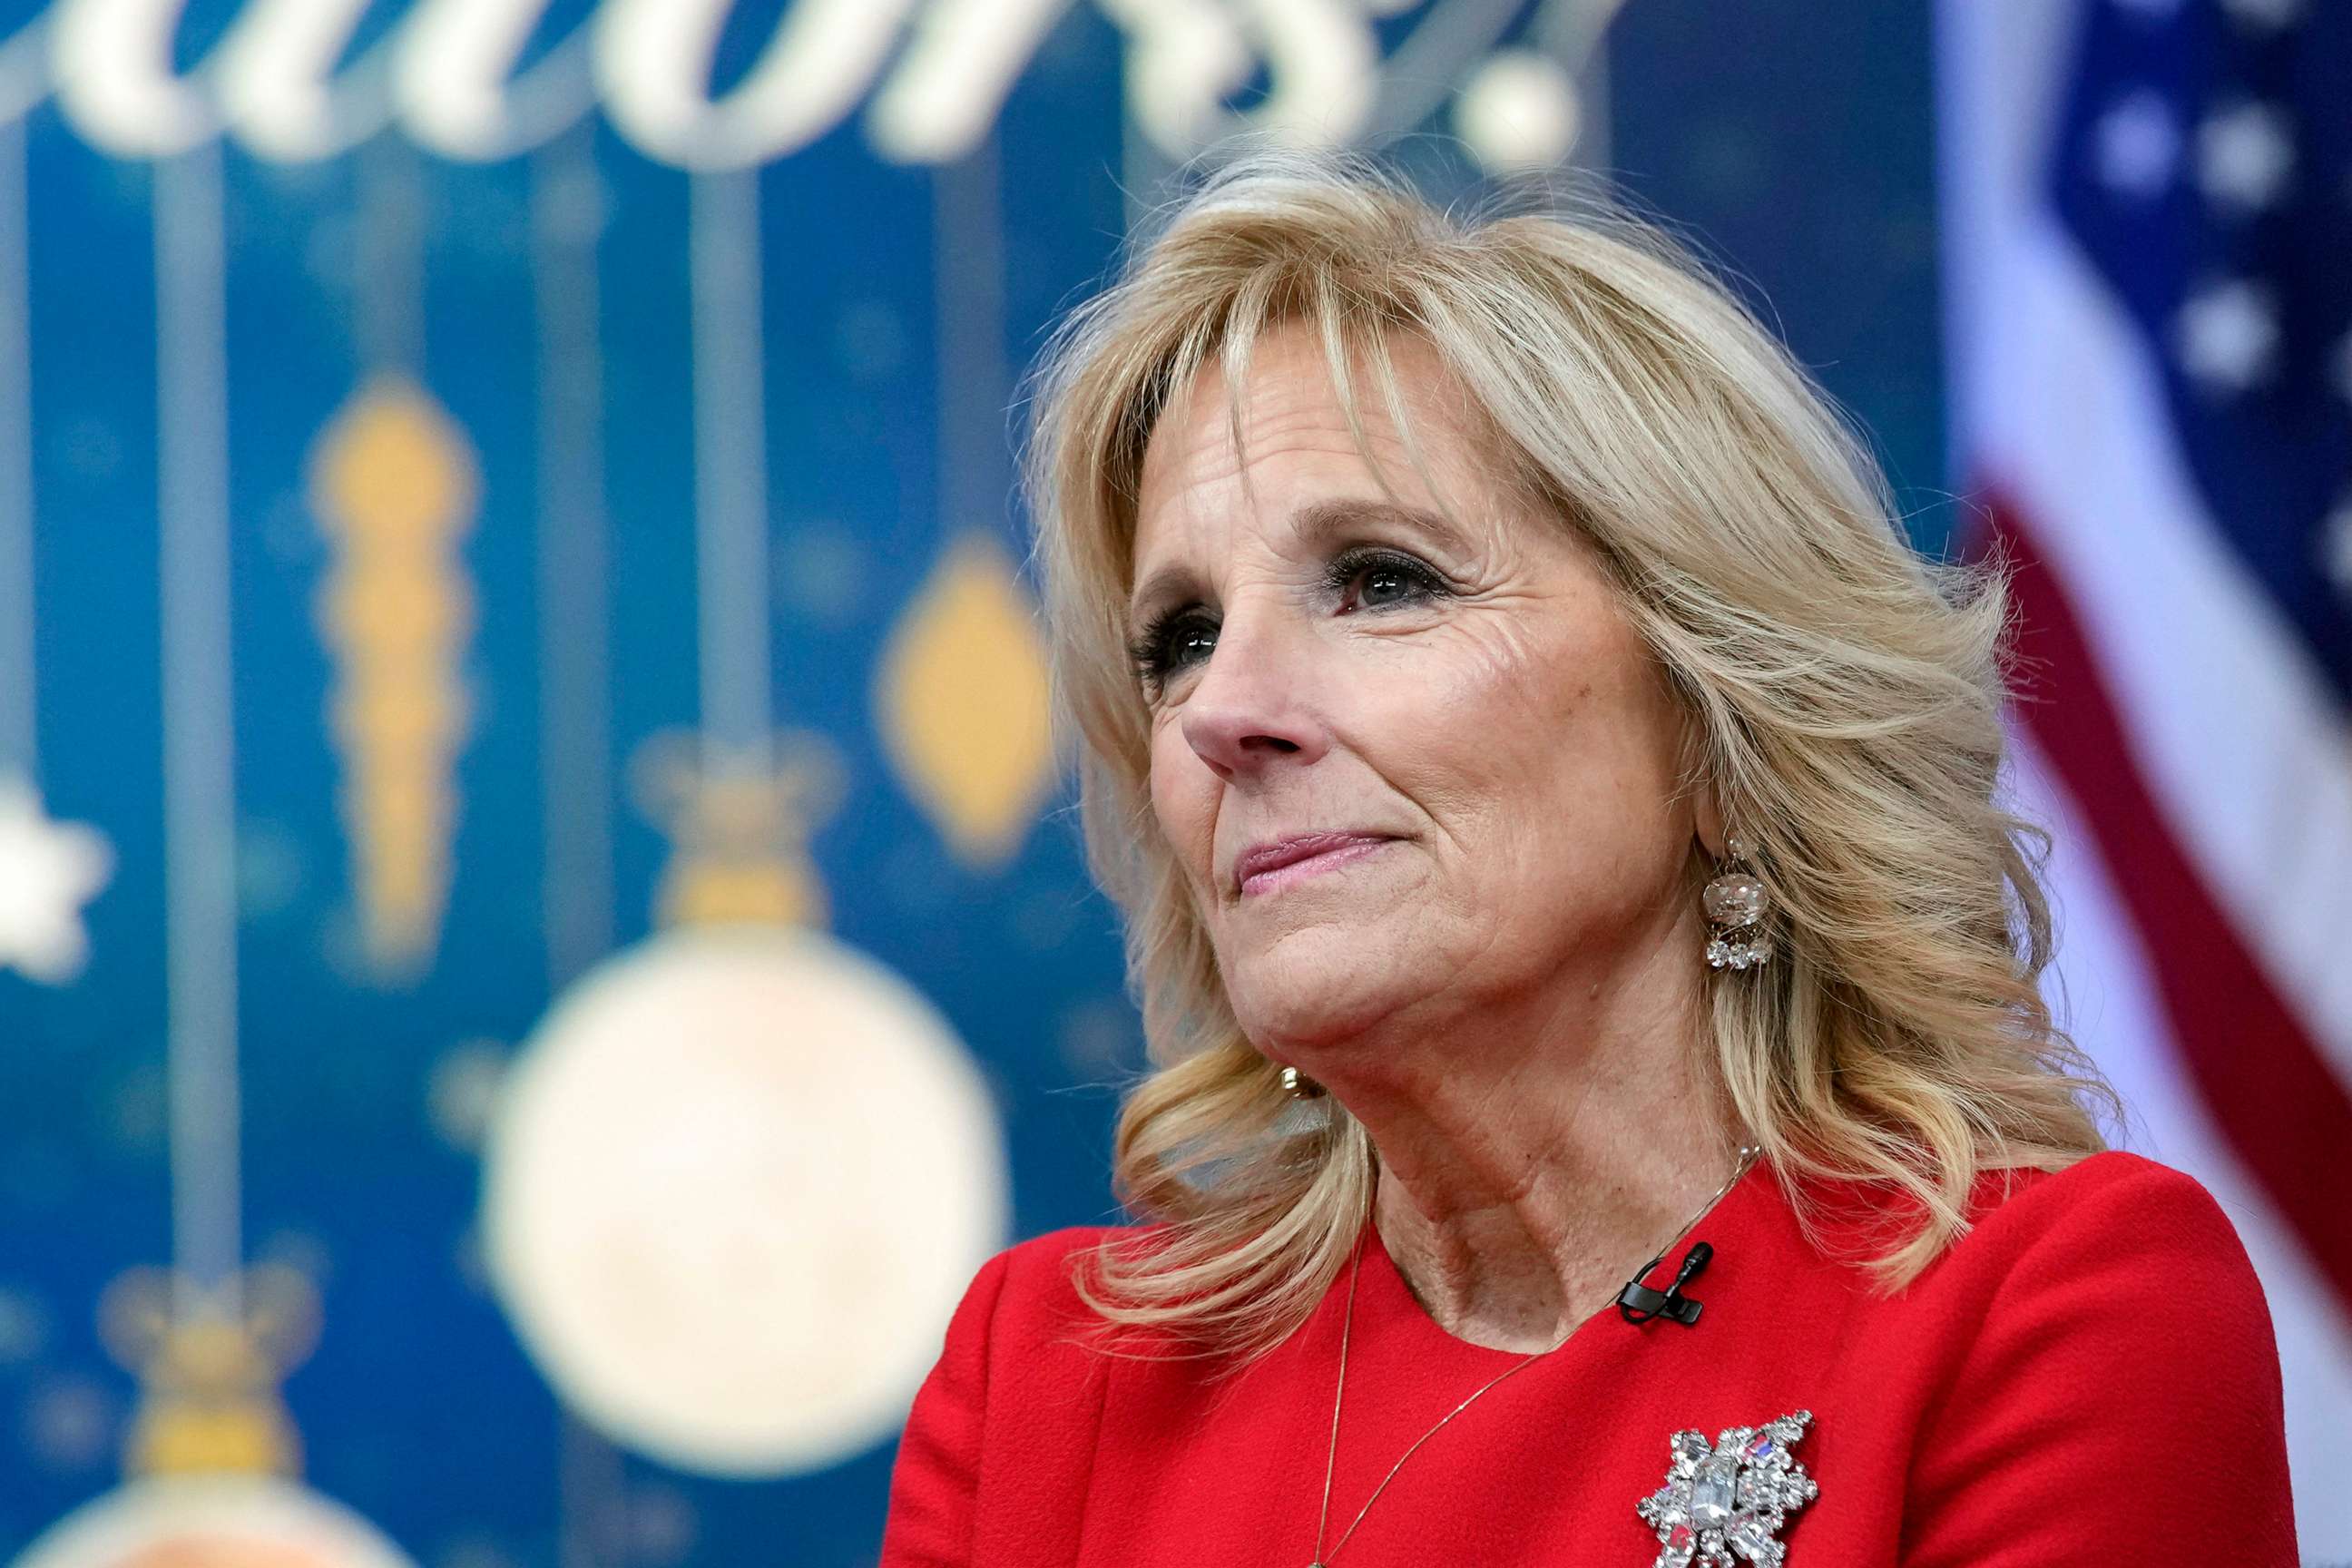 PHOTO: In this Dec. 12, 2022, file photo, First lady Jill Biden speaks at an educator appreciation event in the South Court Auditorium on the White House complex in Washington, D.C.